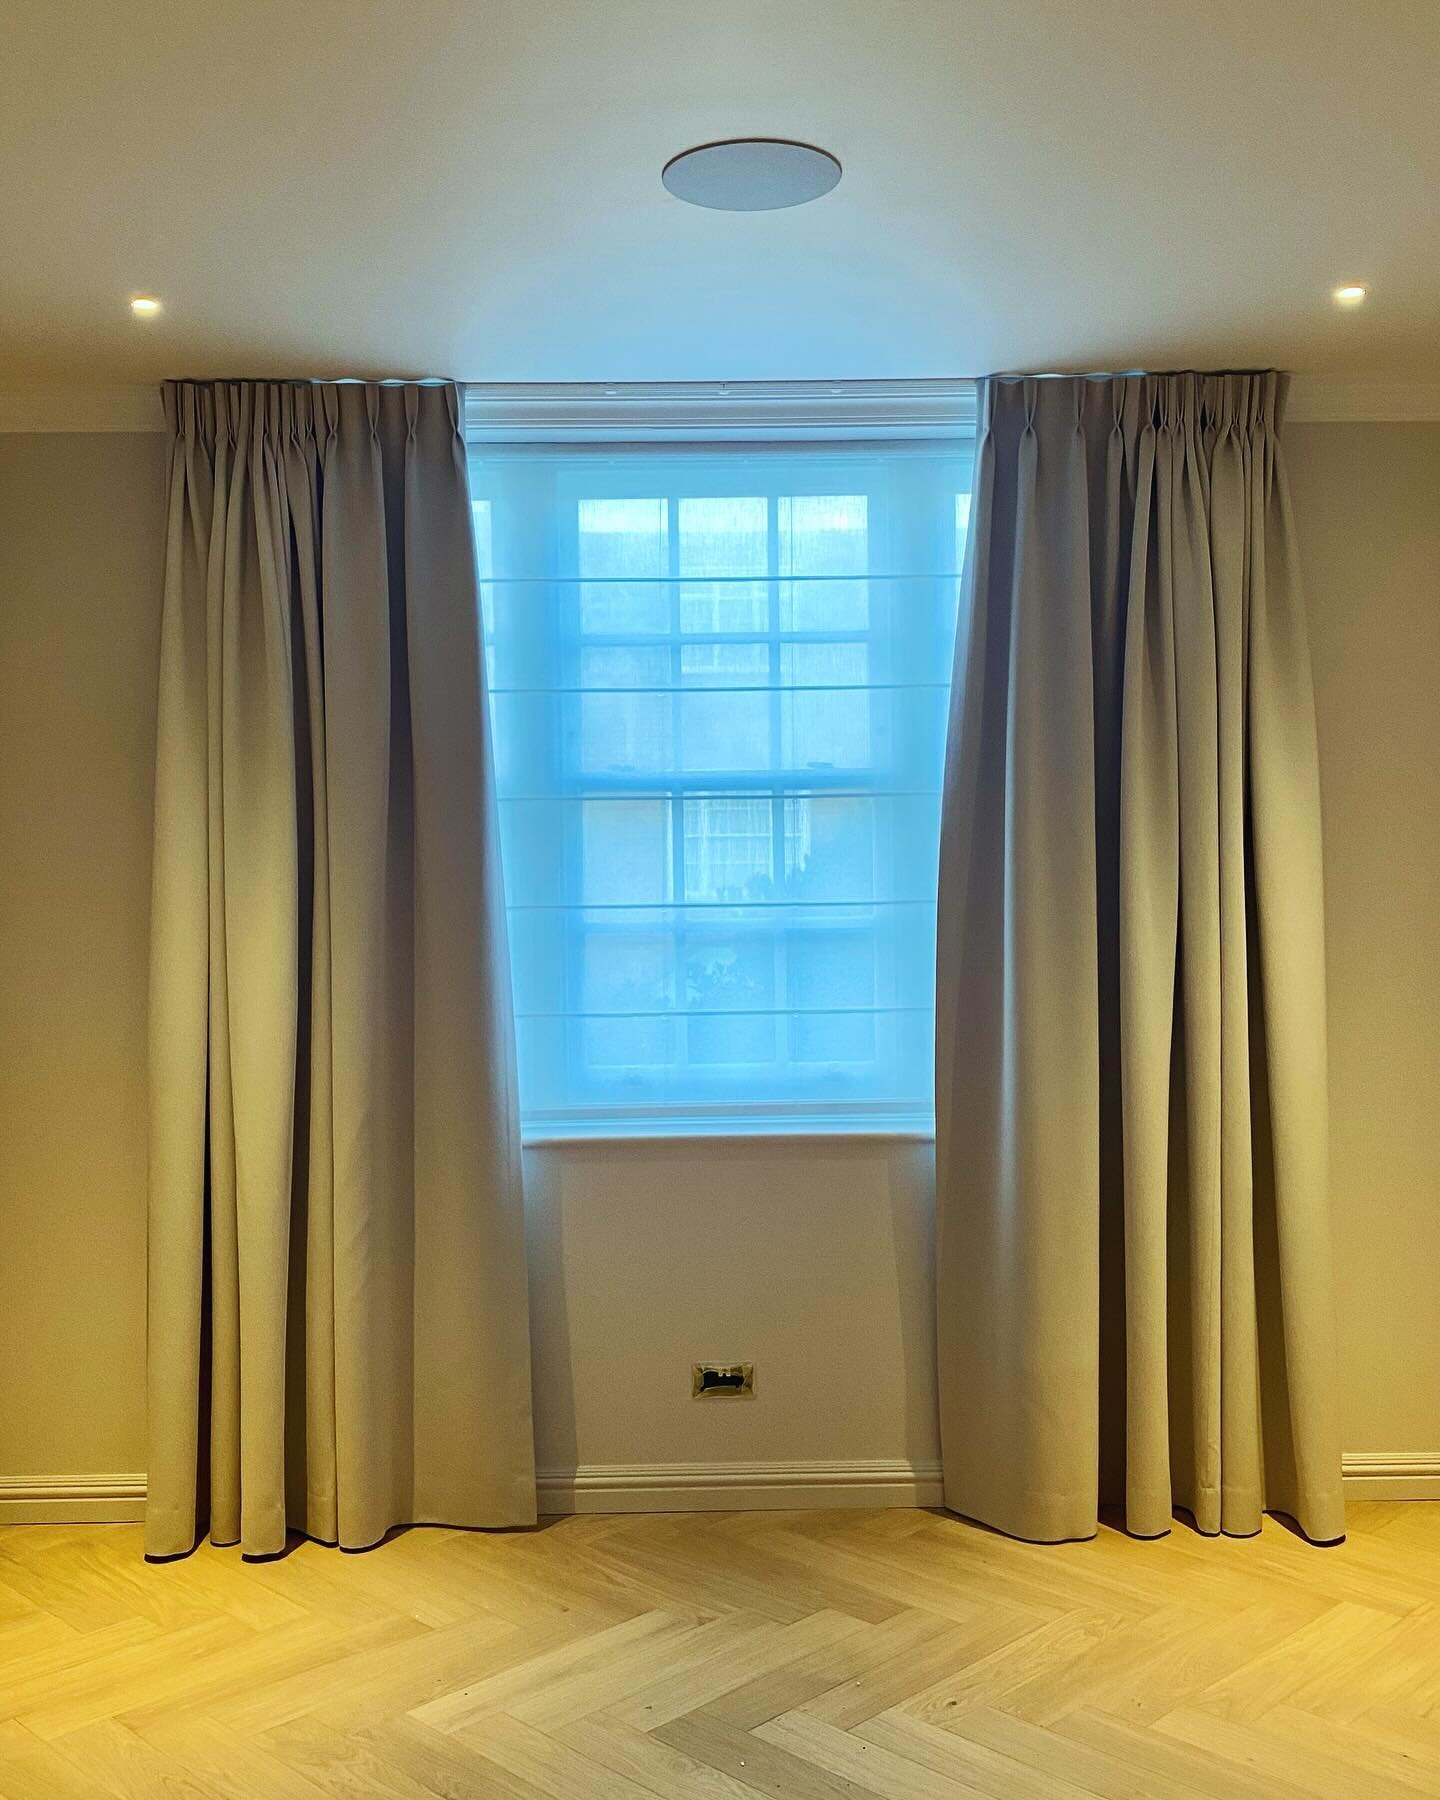 A combination of bespoke roman blinds + curtains and double roman blinds in a tranquil decor of our recent installation in Kensington and Chelsea.  #curtains #curtainsdesign #curtainsandblinds #curtainshop #londoninteriors #londoninteriordesign #inte